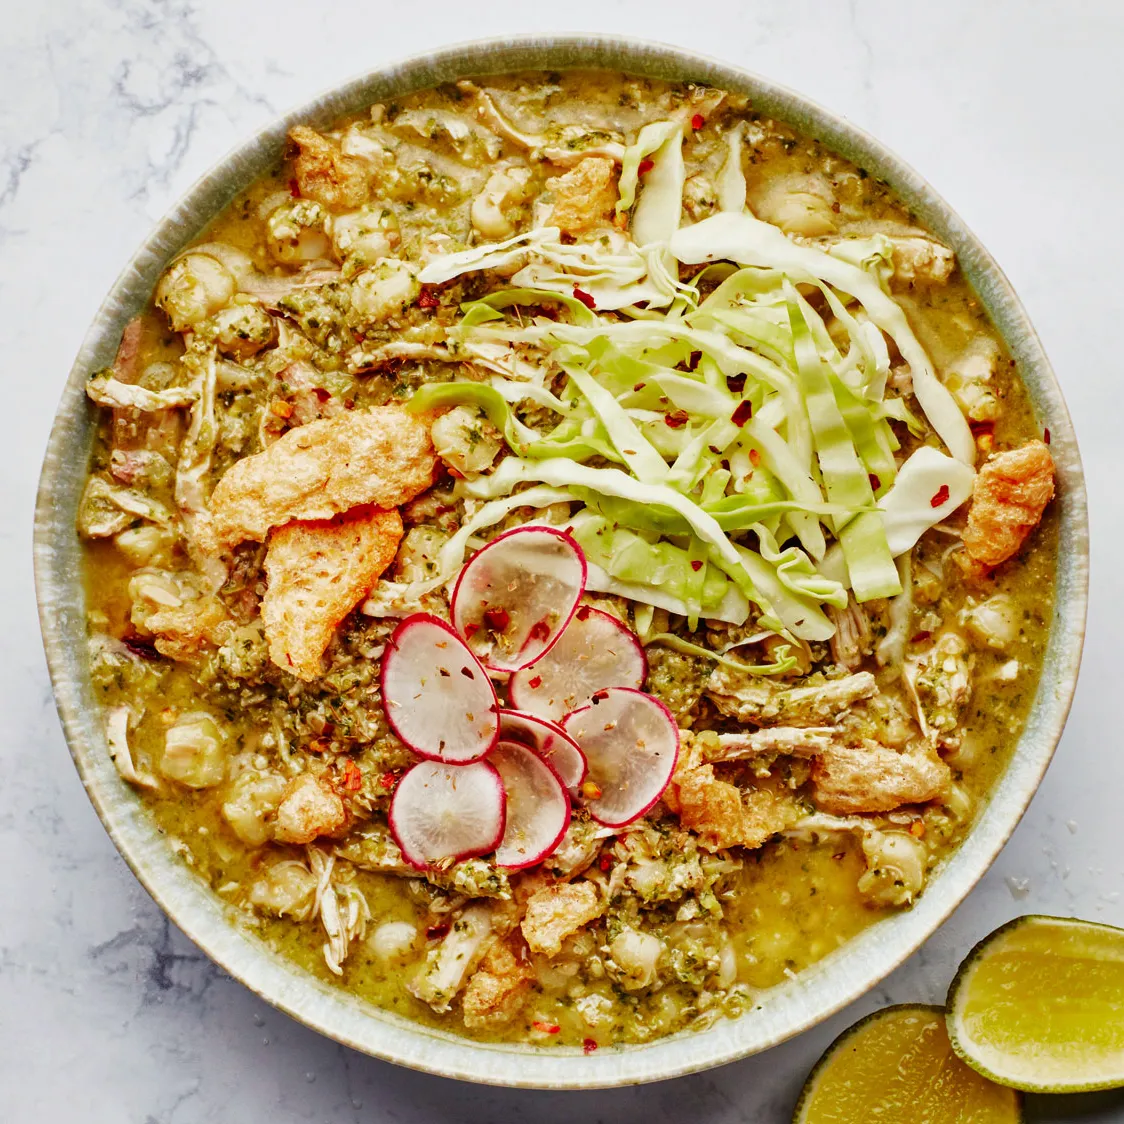 Pozole verde with a vibrant green broth served with tortilla chips